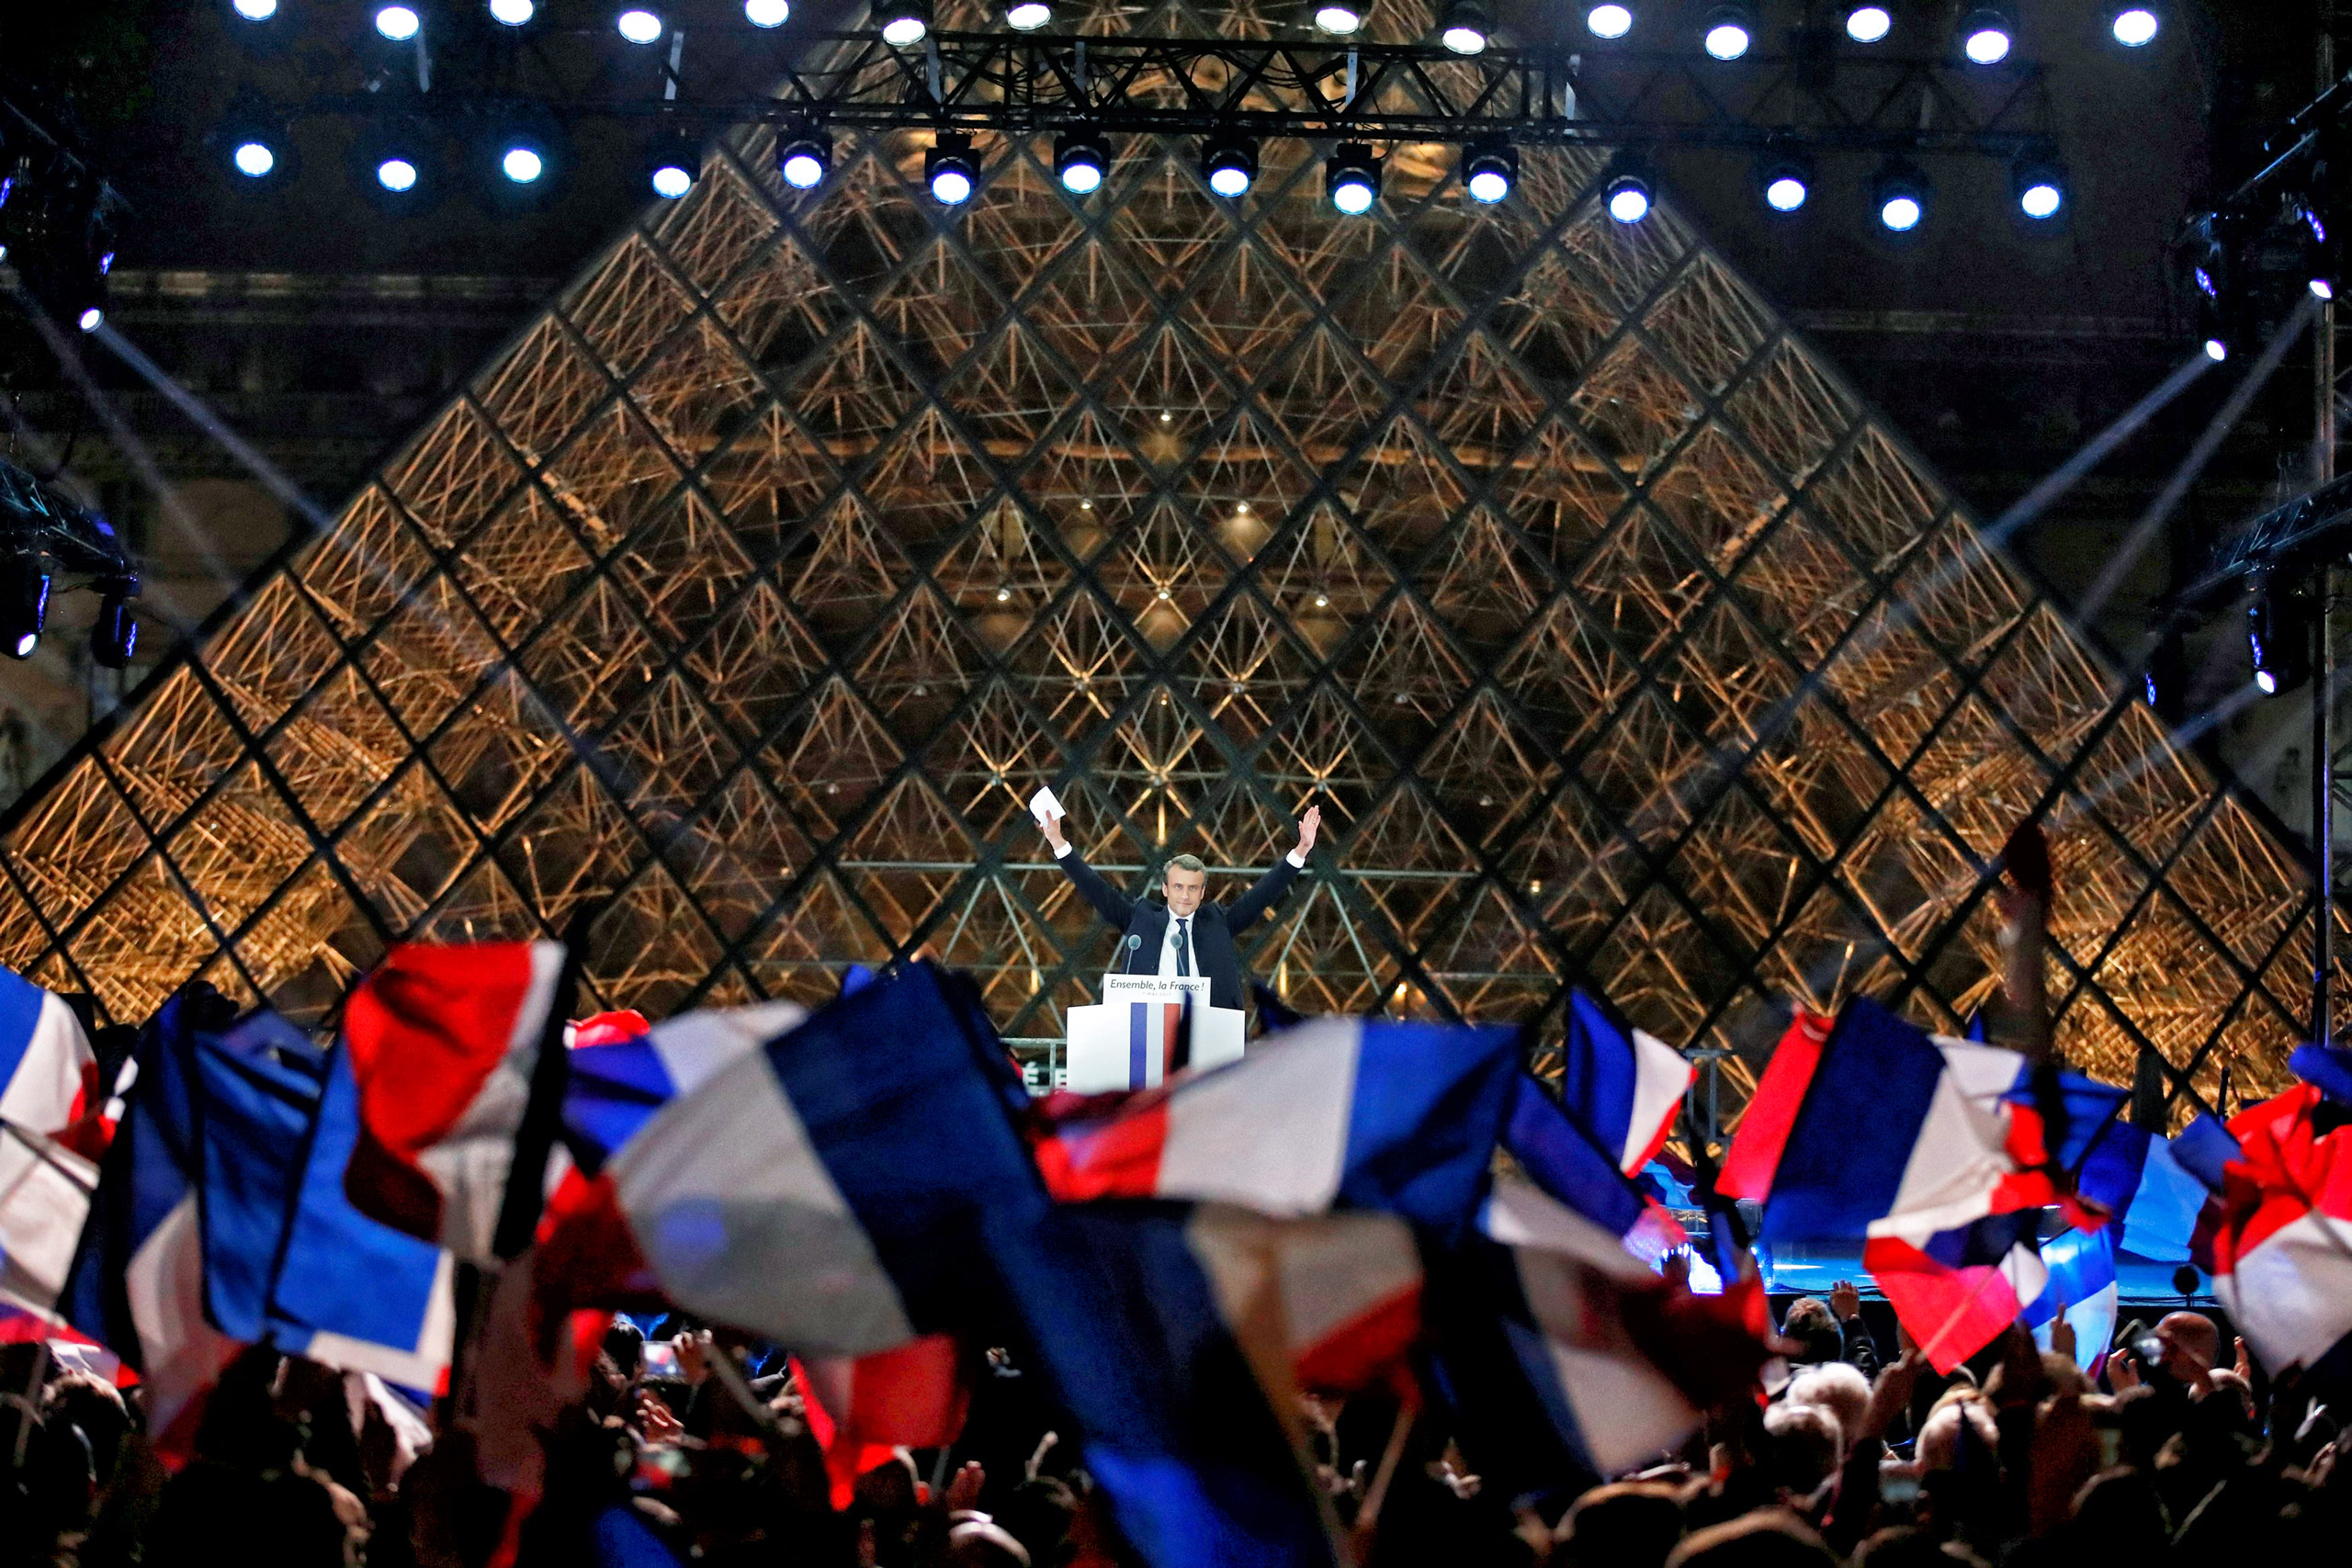 france-youngest-leader-since-napoleon-takes-stage-emmanuel-macron-christian-hartmann